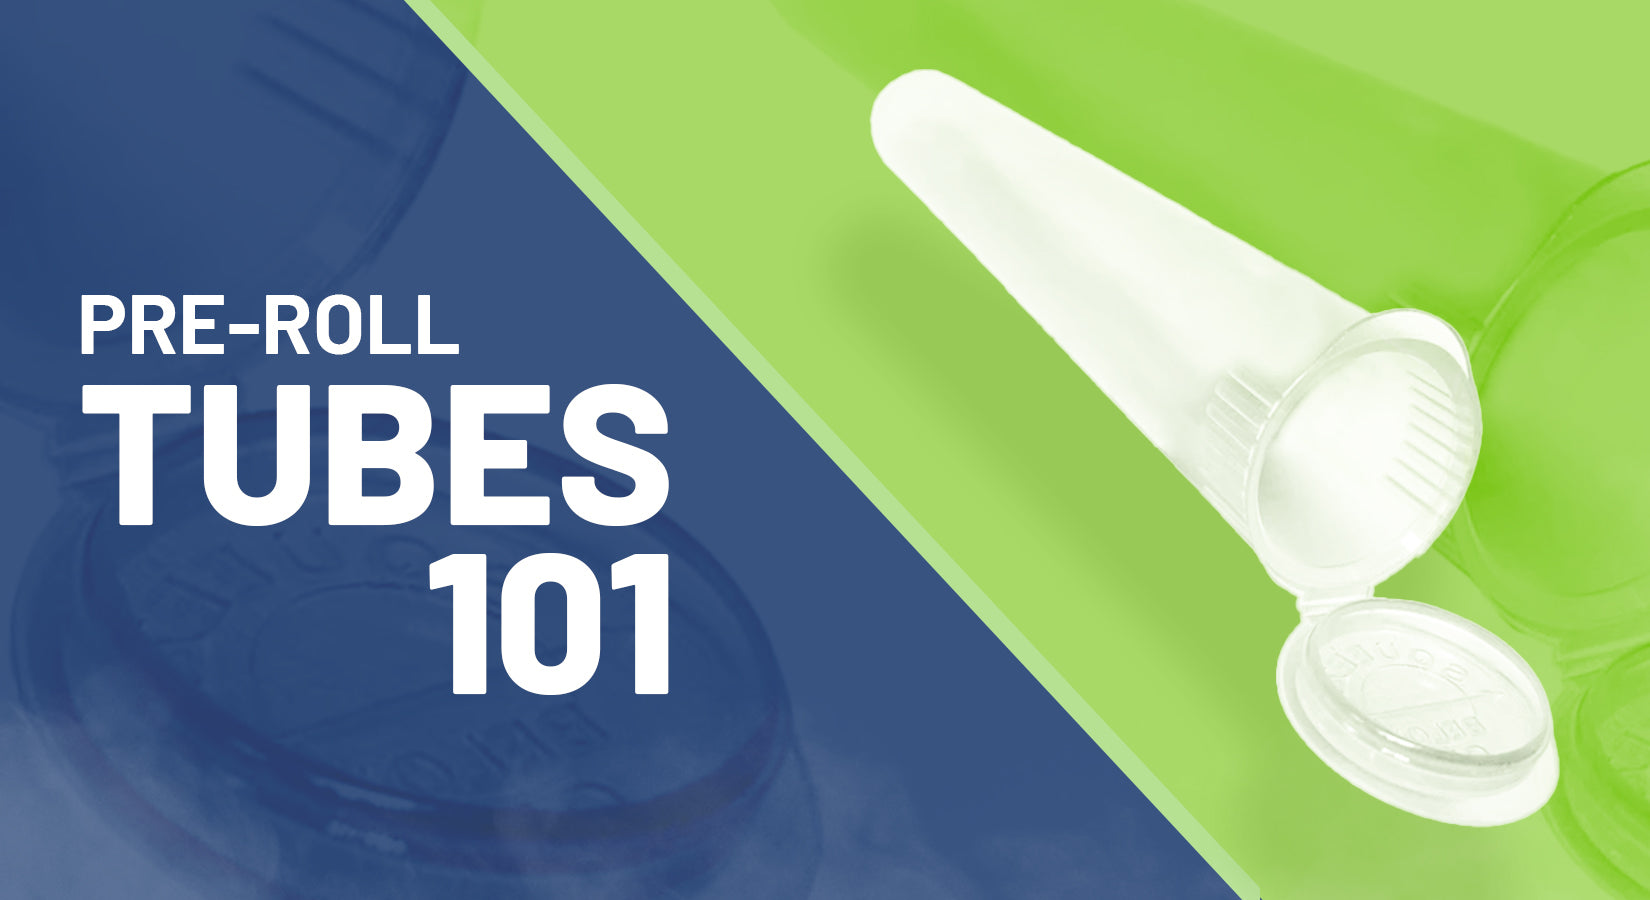 Everything You Need to Know About Pre-Roll Tubes